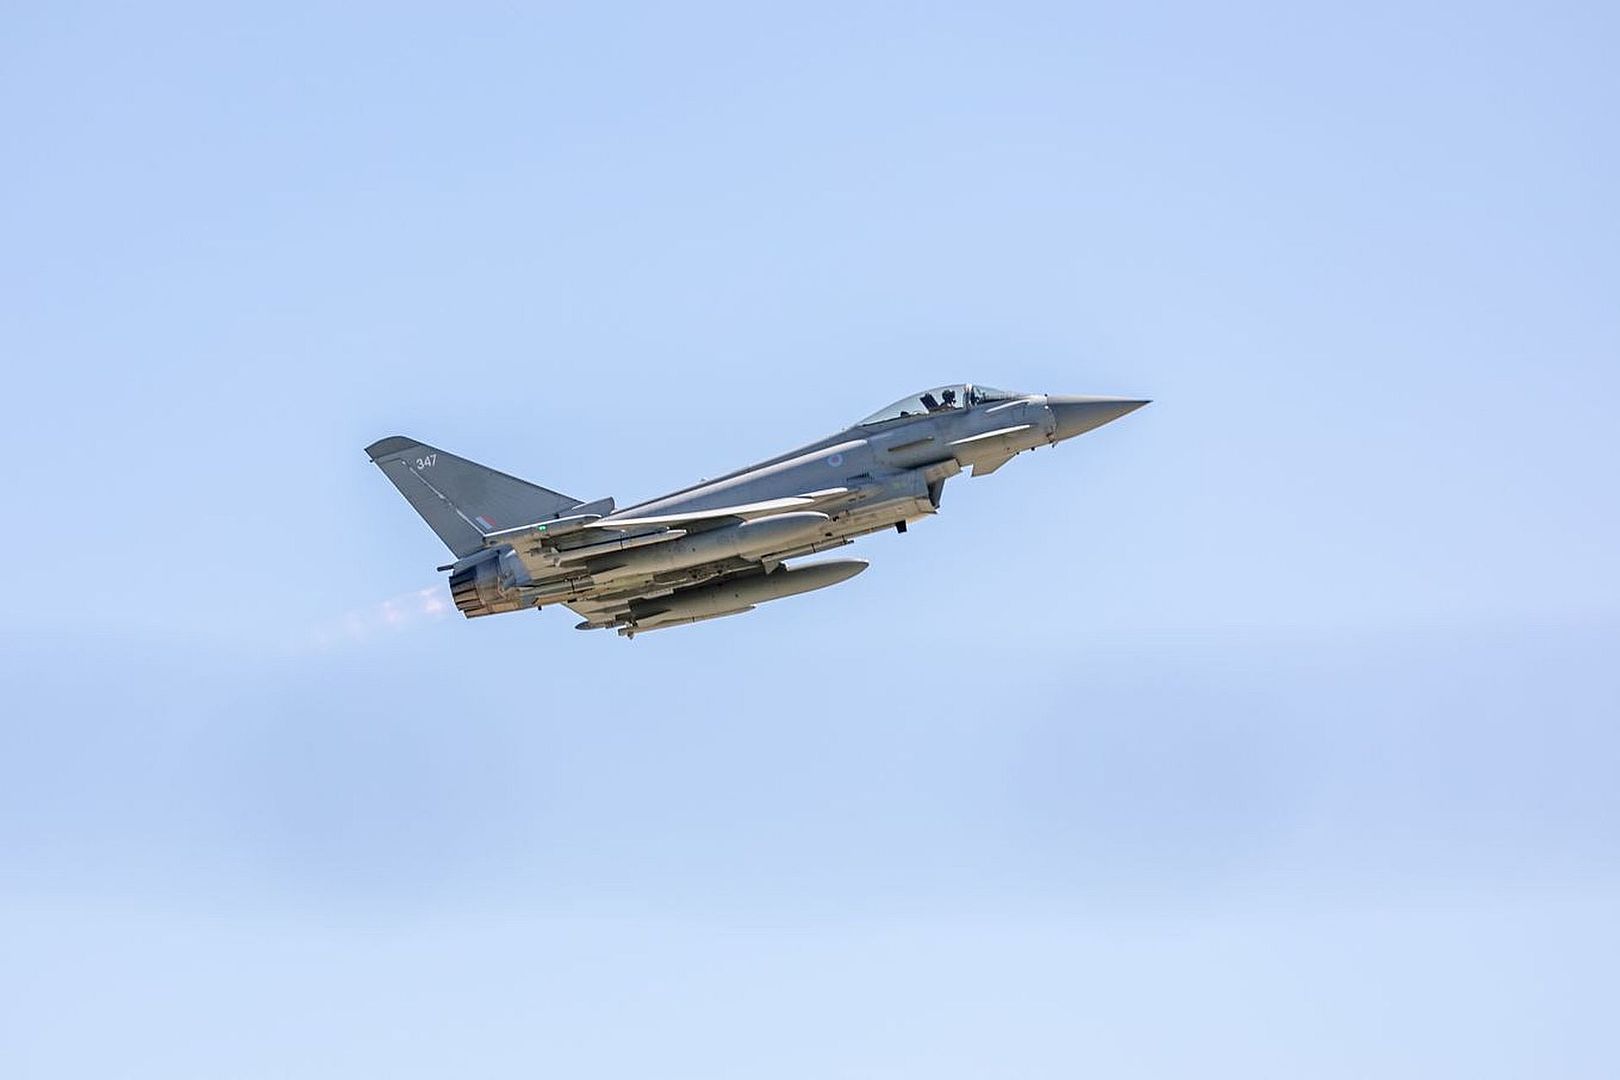 Typhoons From 121 Expeditionary Air Wing Based Near Constanta In Romania Carried Out A Close Air Support Training Mission With NATO